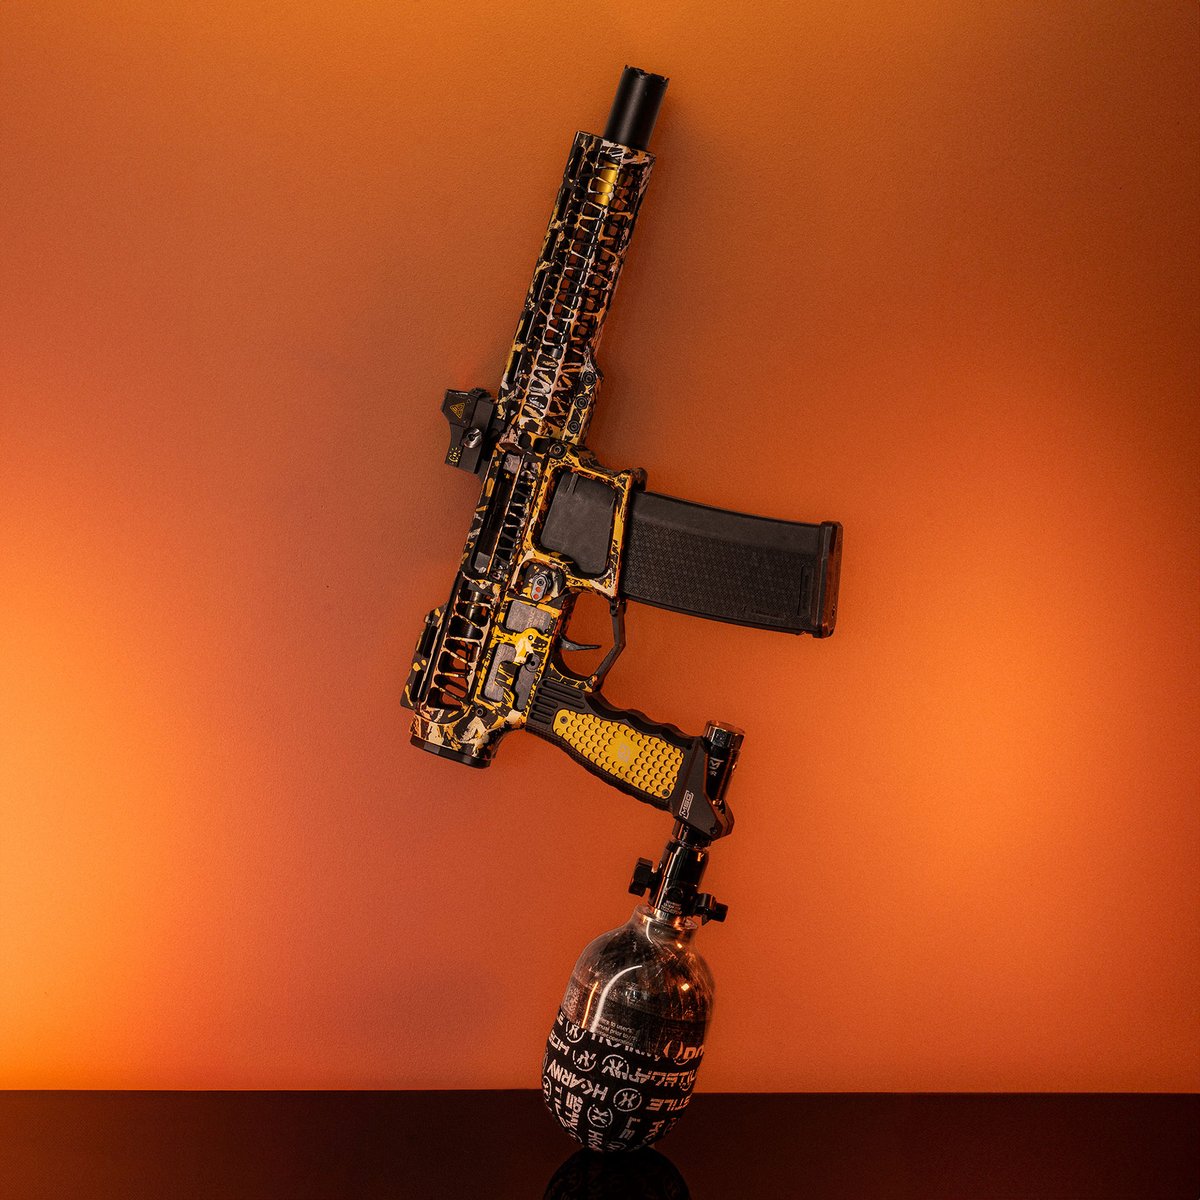 News: Mancraft Announces New Anodising Technique Coming soon to Mancraft their Splash Anodising service allowing customers to select the colour design for their airsoft guns. Read the full story: popularairsoft.com/news/mancraft-… #airsoft